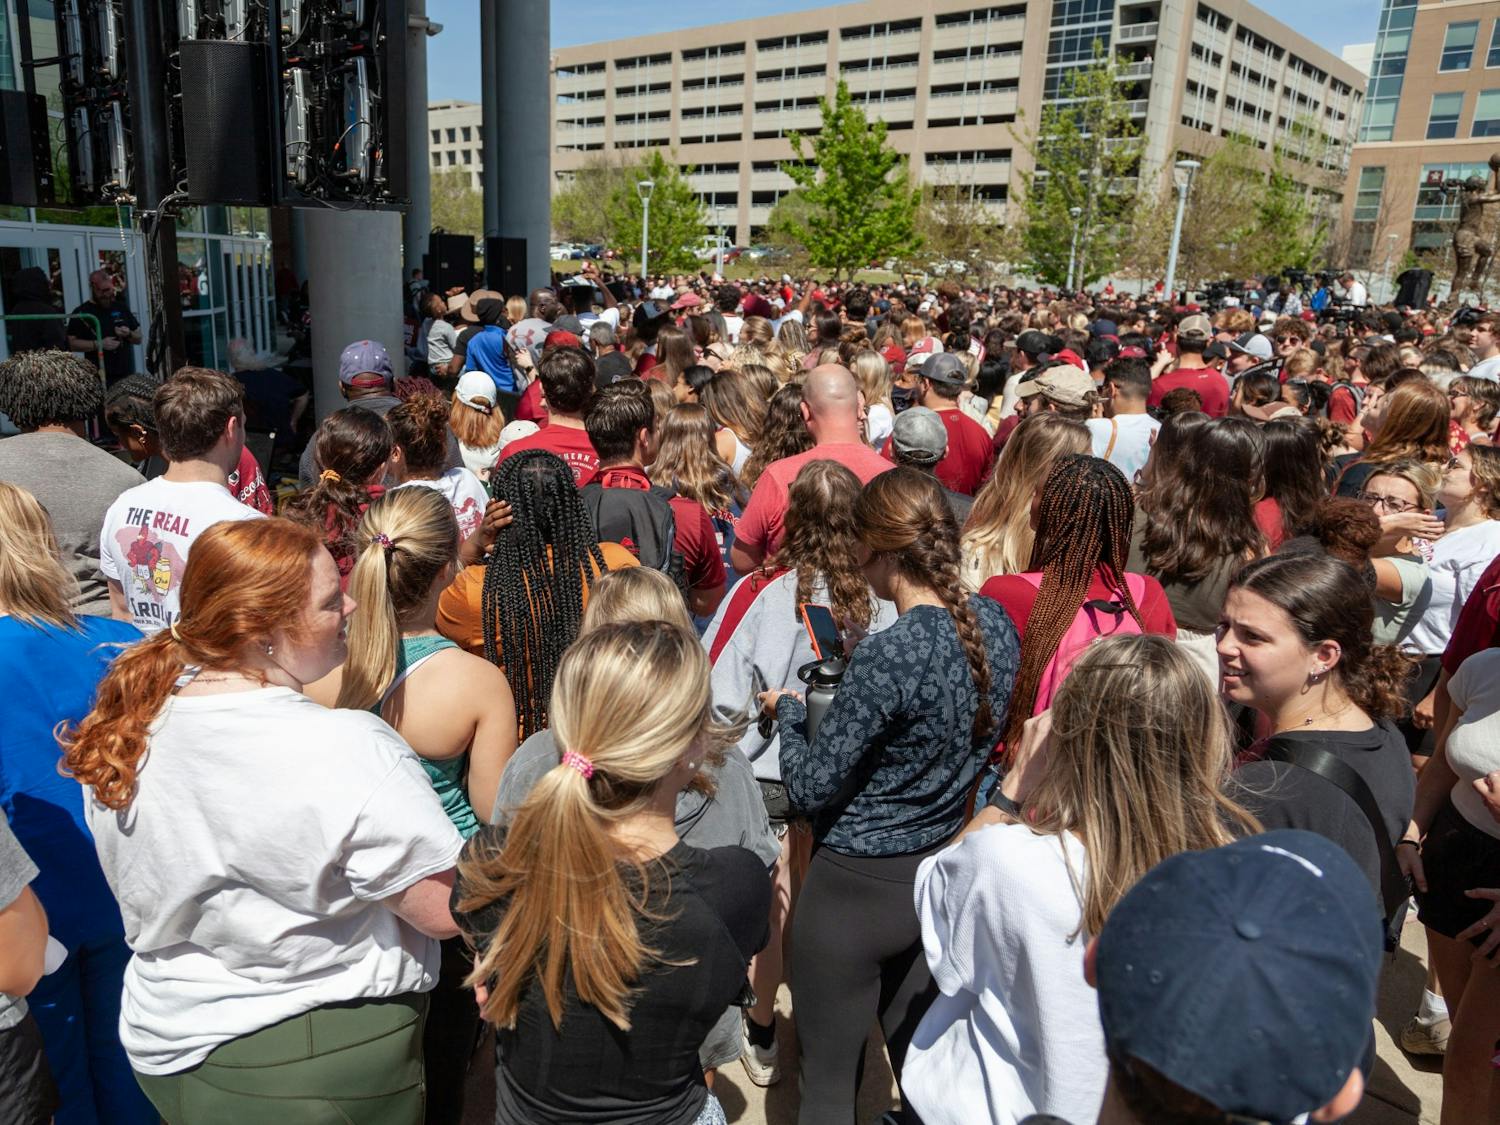 South Carolina fans prepare for the women's basketball team to arrive at Colonial Life Arena in Columbia, SC on April 4, 2022. Fans crowded around the outside arena before the team arrived.